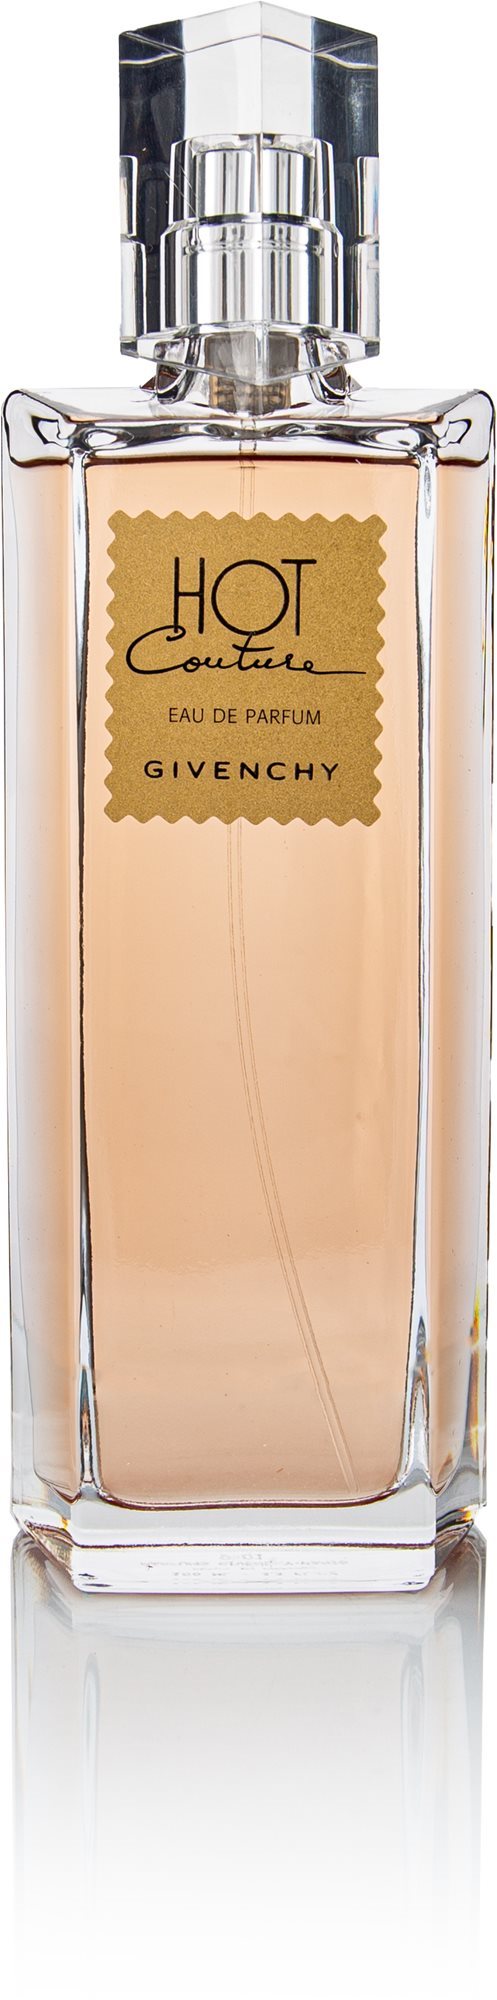 GIVENCHY Hot Couture EdP